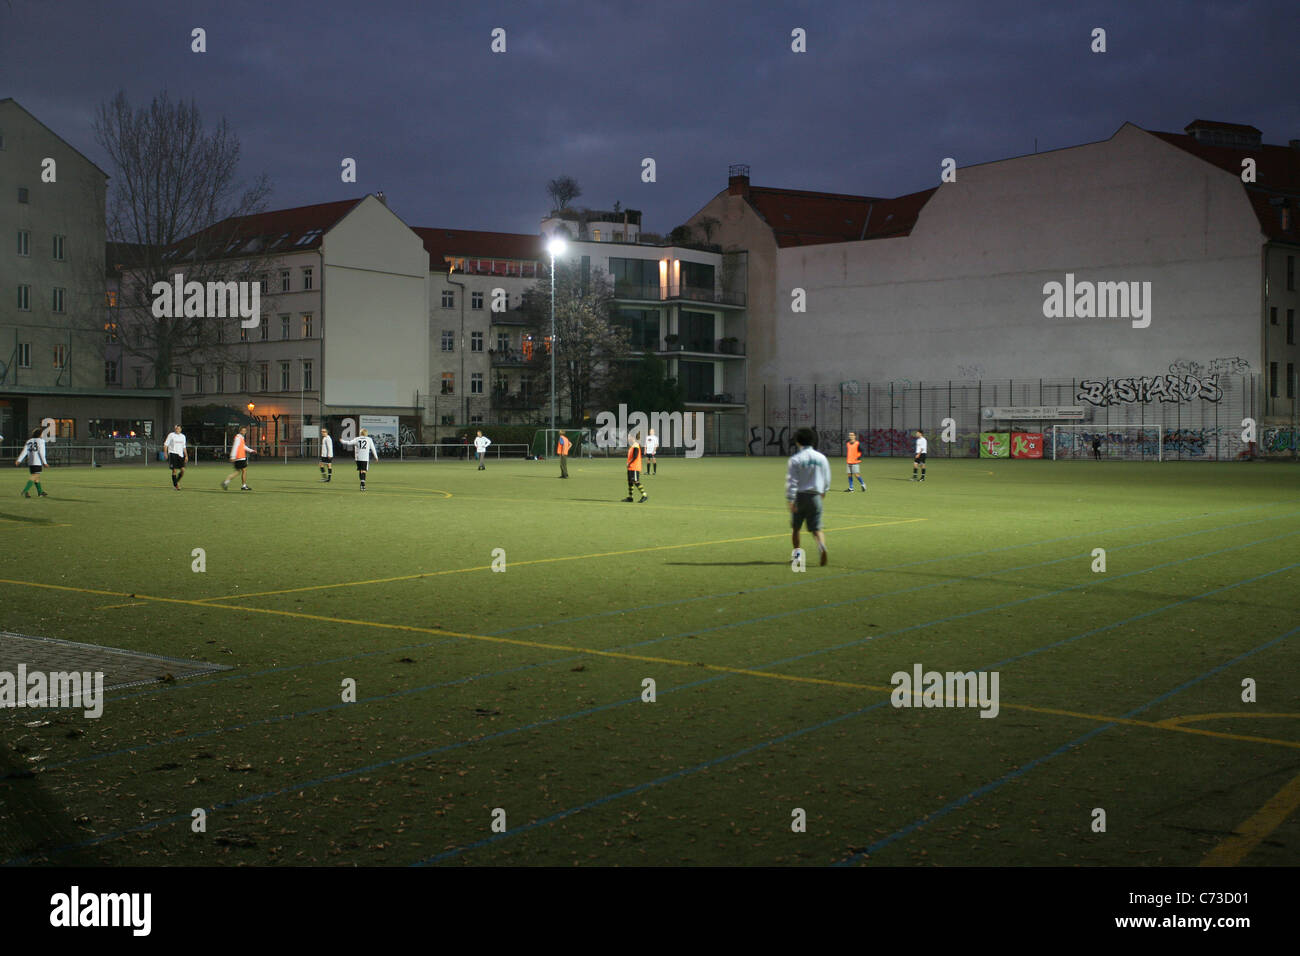 Football pitch, Auguststrasse, Berlin Mitte, Berlin, Germany Stock Photo